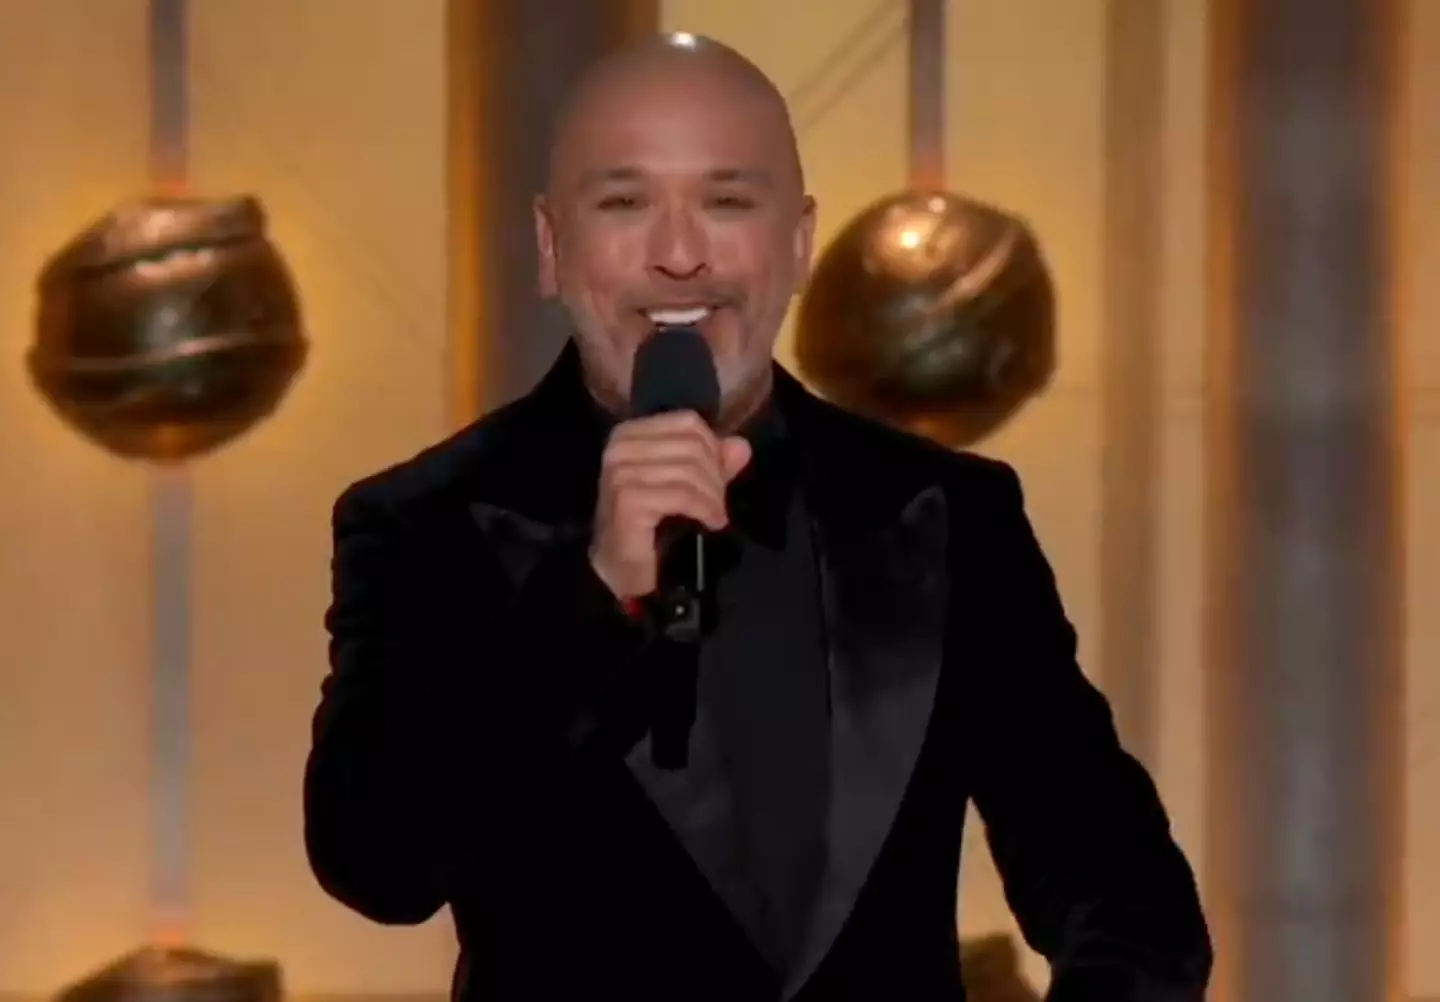 Jo Koy quickly recognized that his joke didn't land.